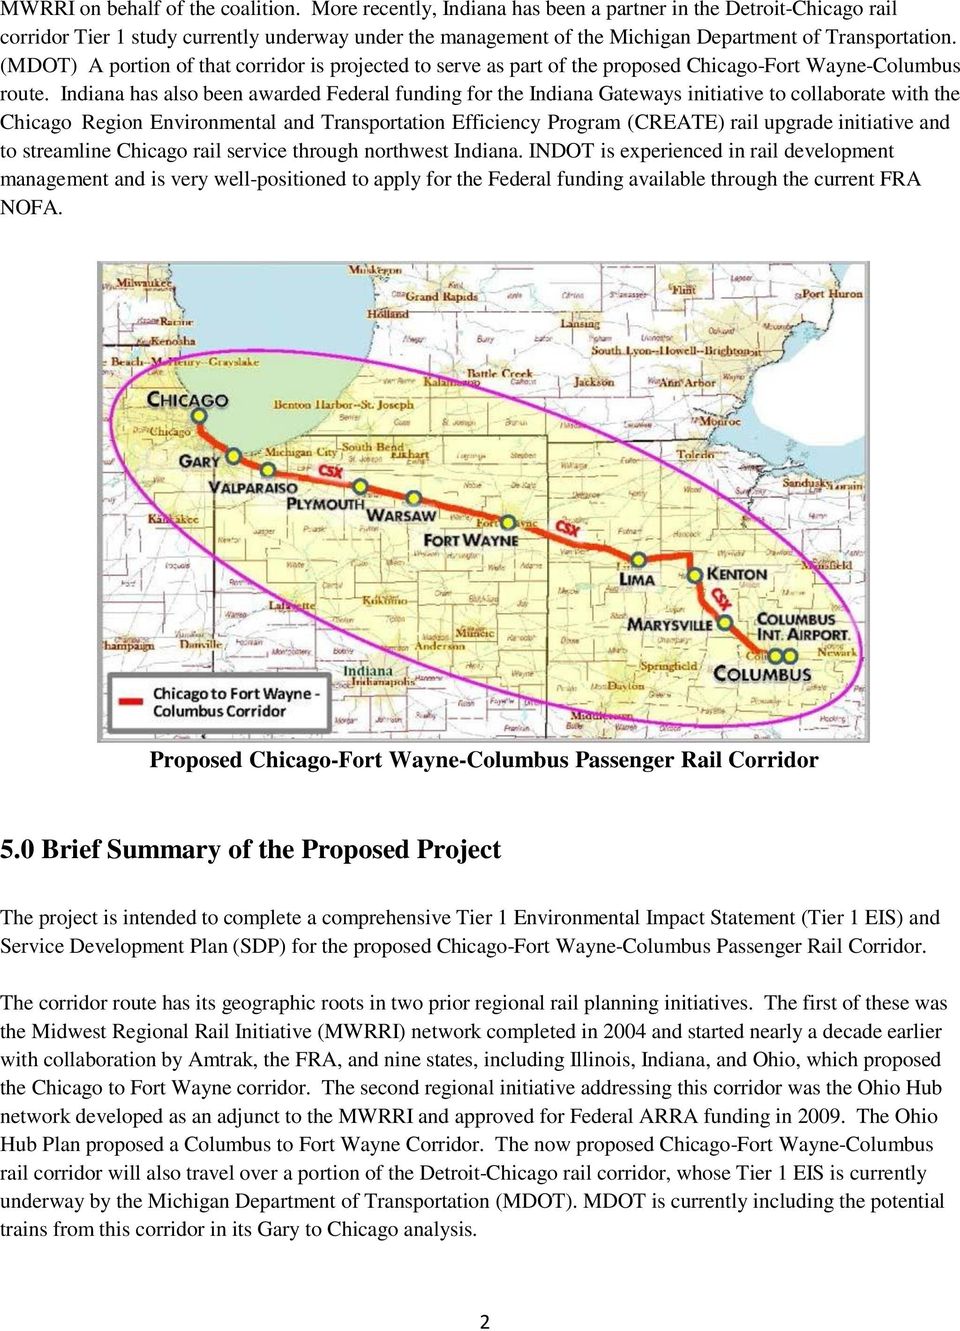 (MDOT) A portion of that corridor is projected to serve as part of the proposed Chicago-Fort Wayne-Columbus route.